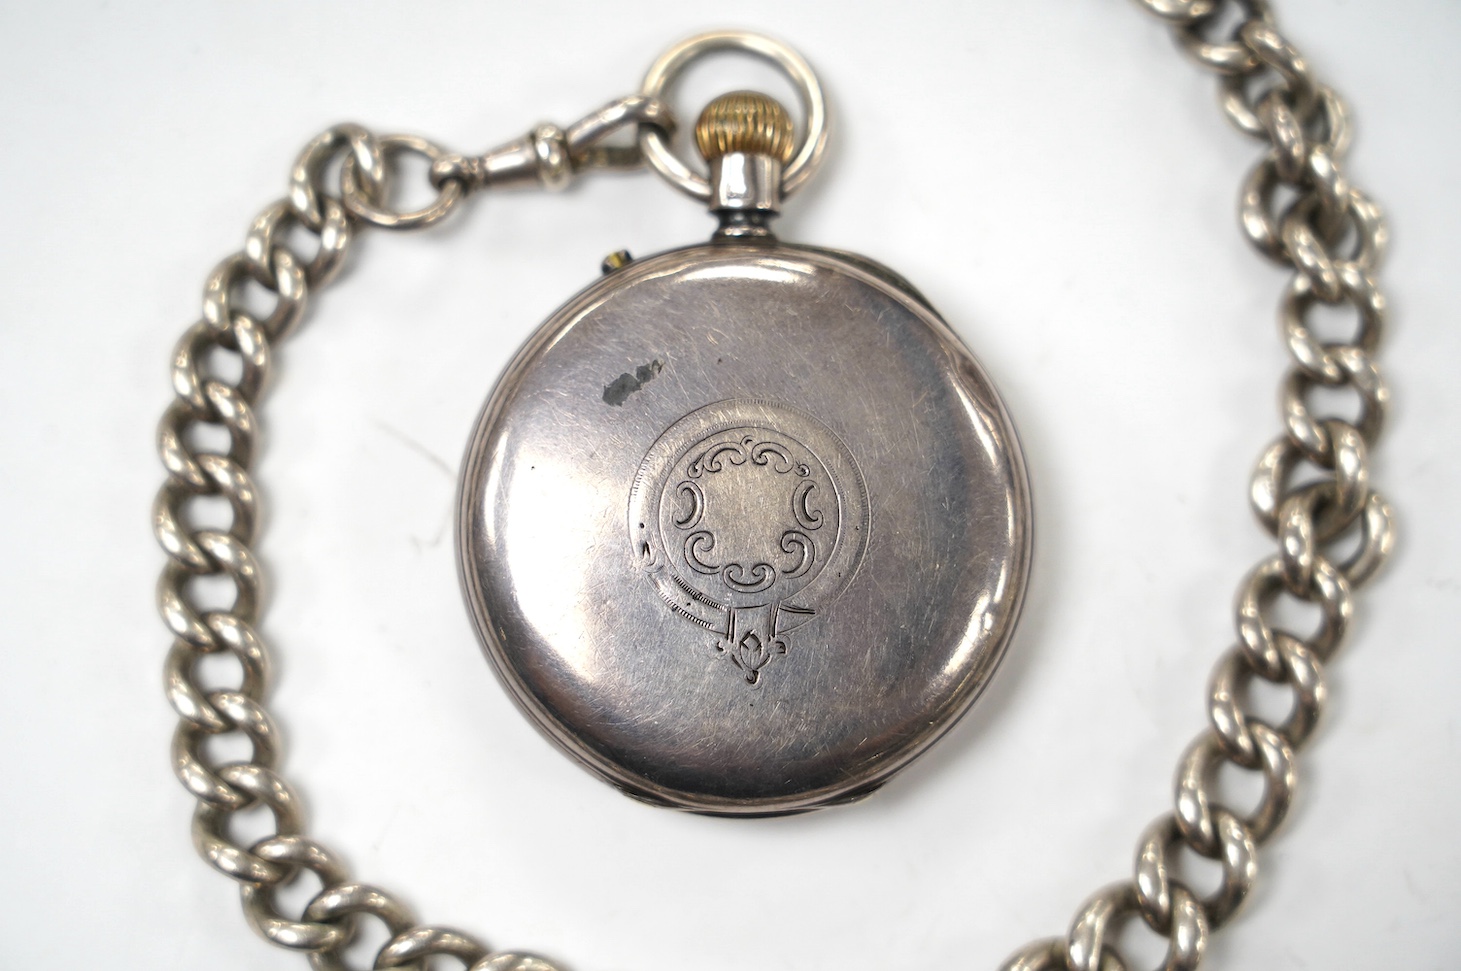 A late Victorian silver open face pocket watch, by J.W. Benson, with Roman dial and subsidiary seconds, together with a silver albert. Condition - poor to fair